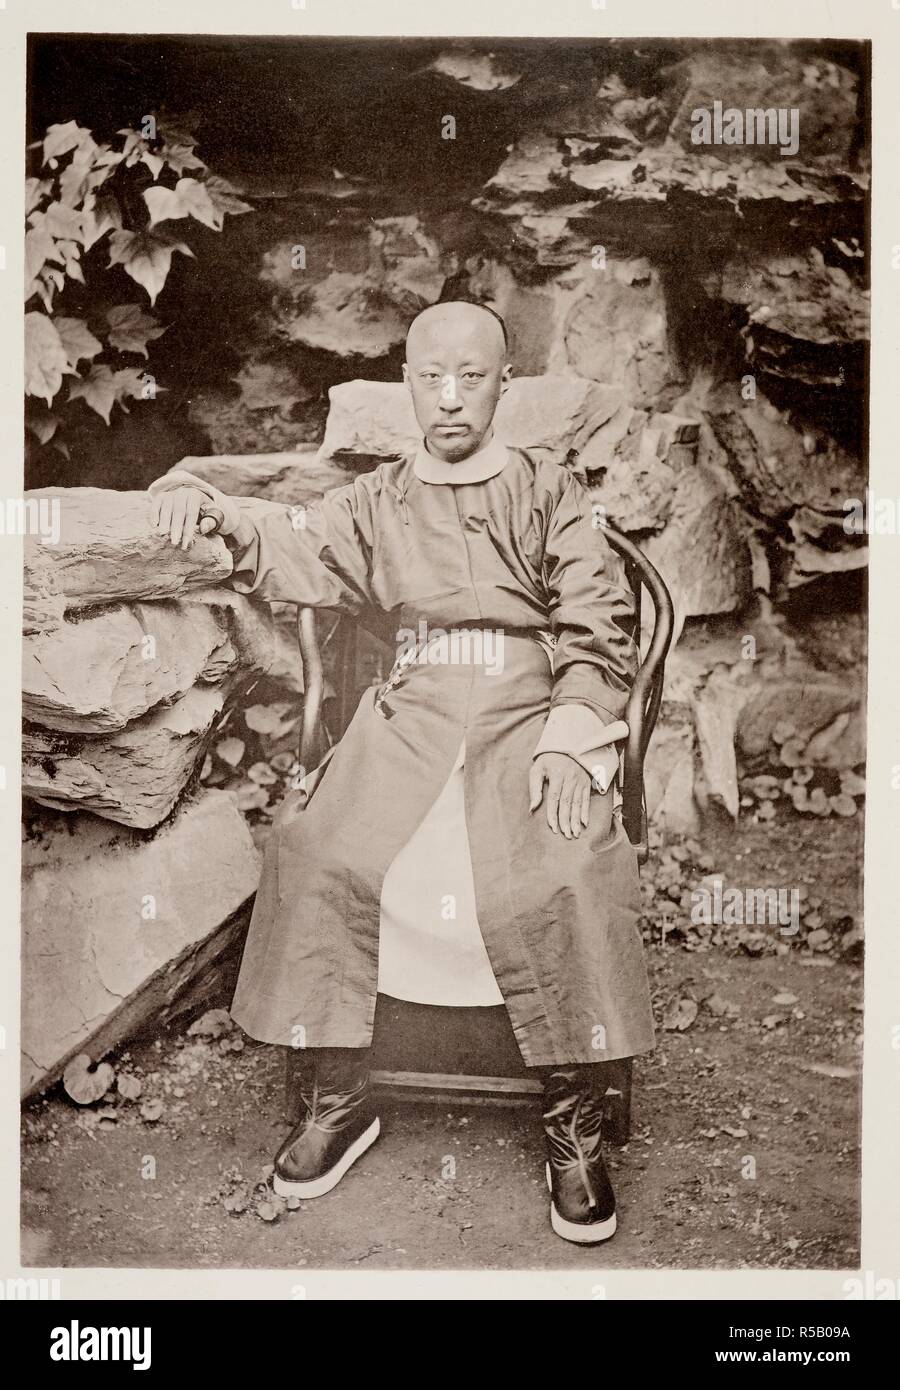 Prince Kung, Pekin, c. 1872. Illustrations of China and its people. London, 1873-4. Callotype. Known as Prince Gong (or Prince Kung in Wades-Giles) or formally Prince Gong of the First Rank, was a prince and statesman of the Qing Dynasty. Source: 1787.d.7, volume 1, plate 1. Author: THOMSON, JOHN. Stock Photo